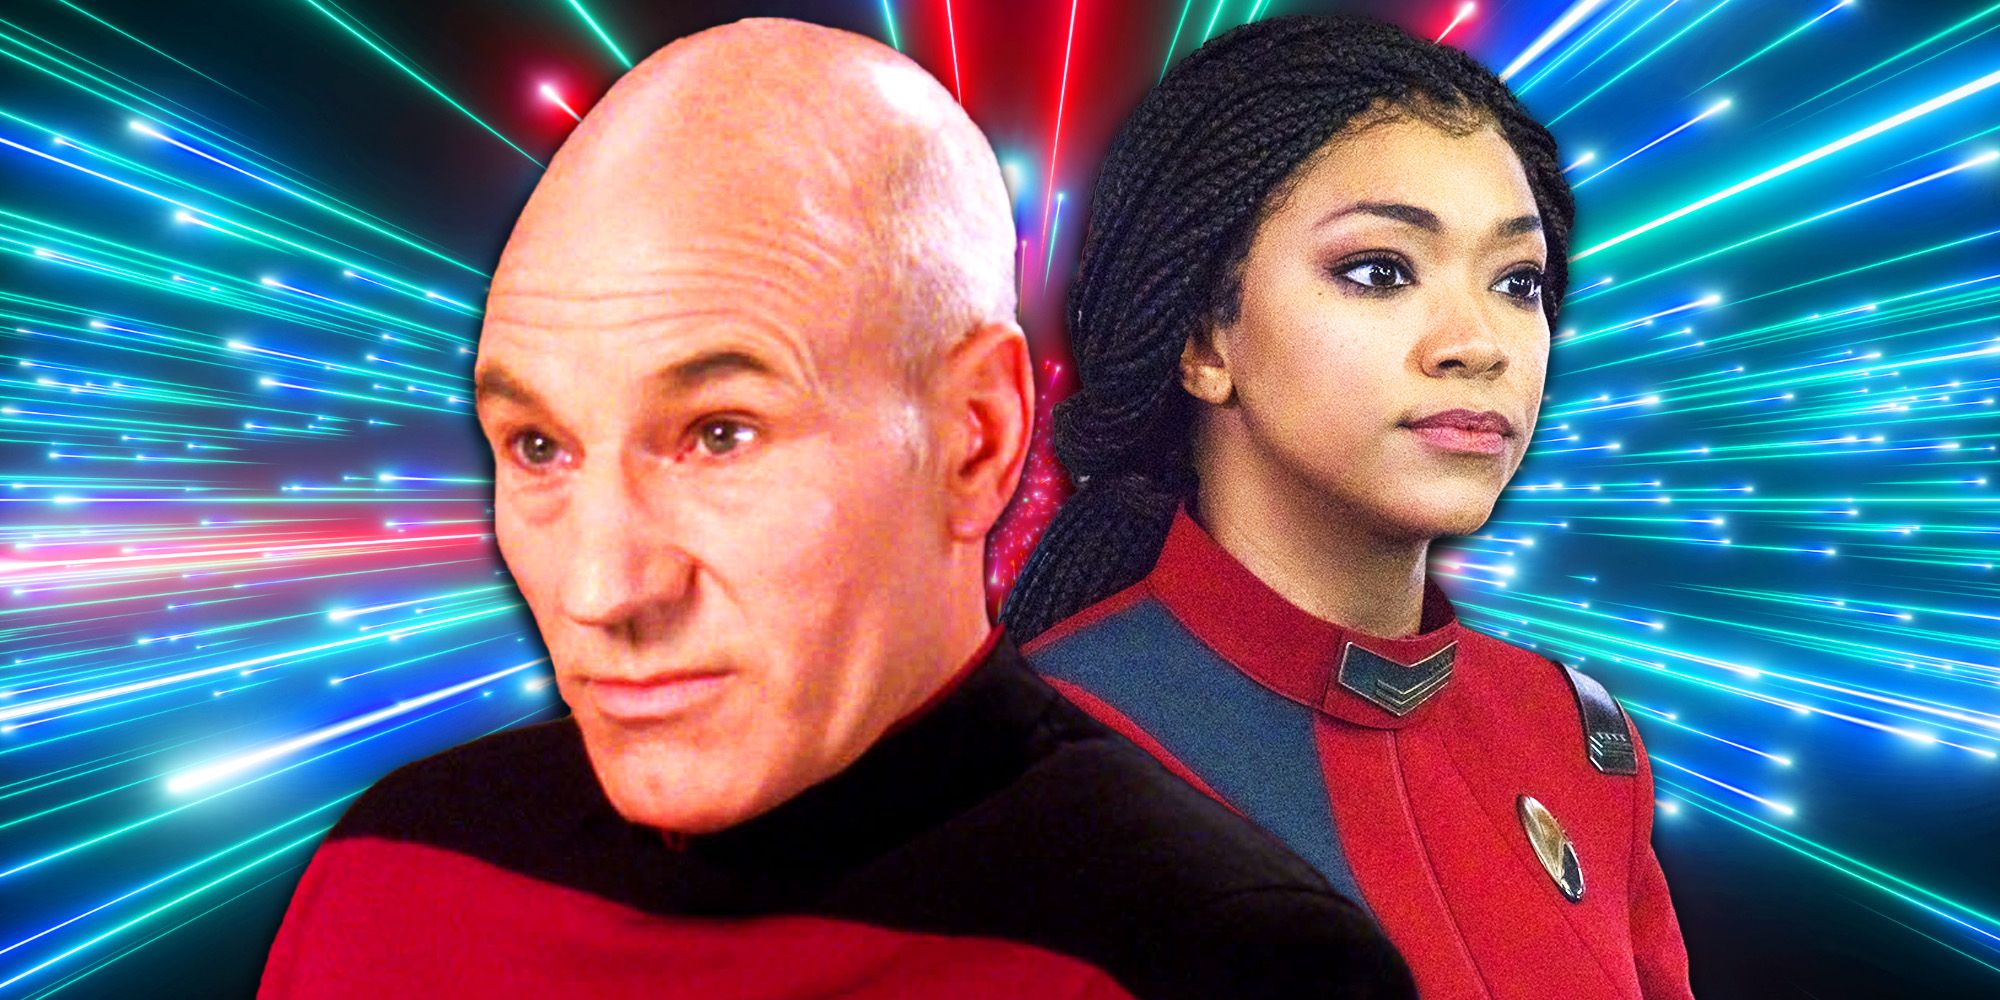 Michael Burnham (Sonequa Martin-Green) from Star Trek: Discovery and Jean-Luc Picard (Partrick Stewart) from Star Trek: The Next Generation on a star field background.